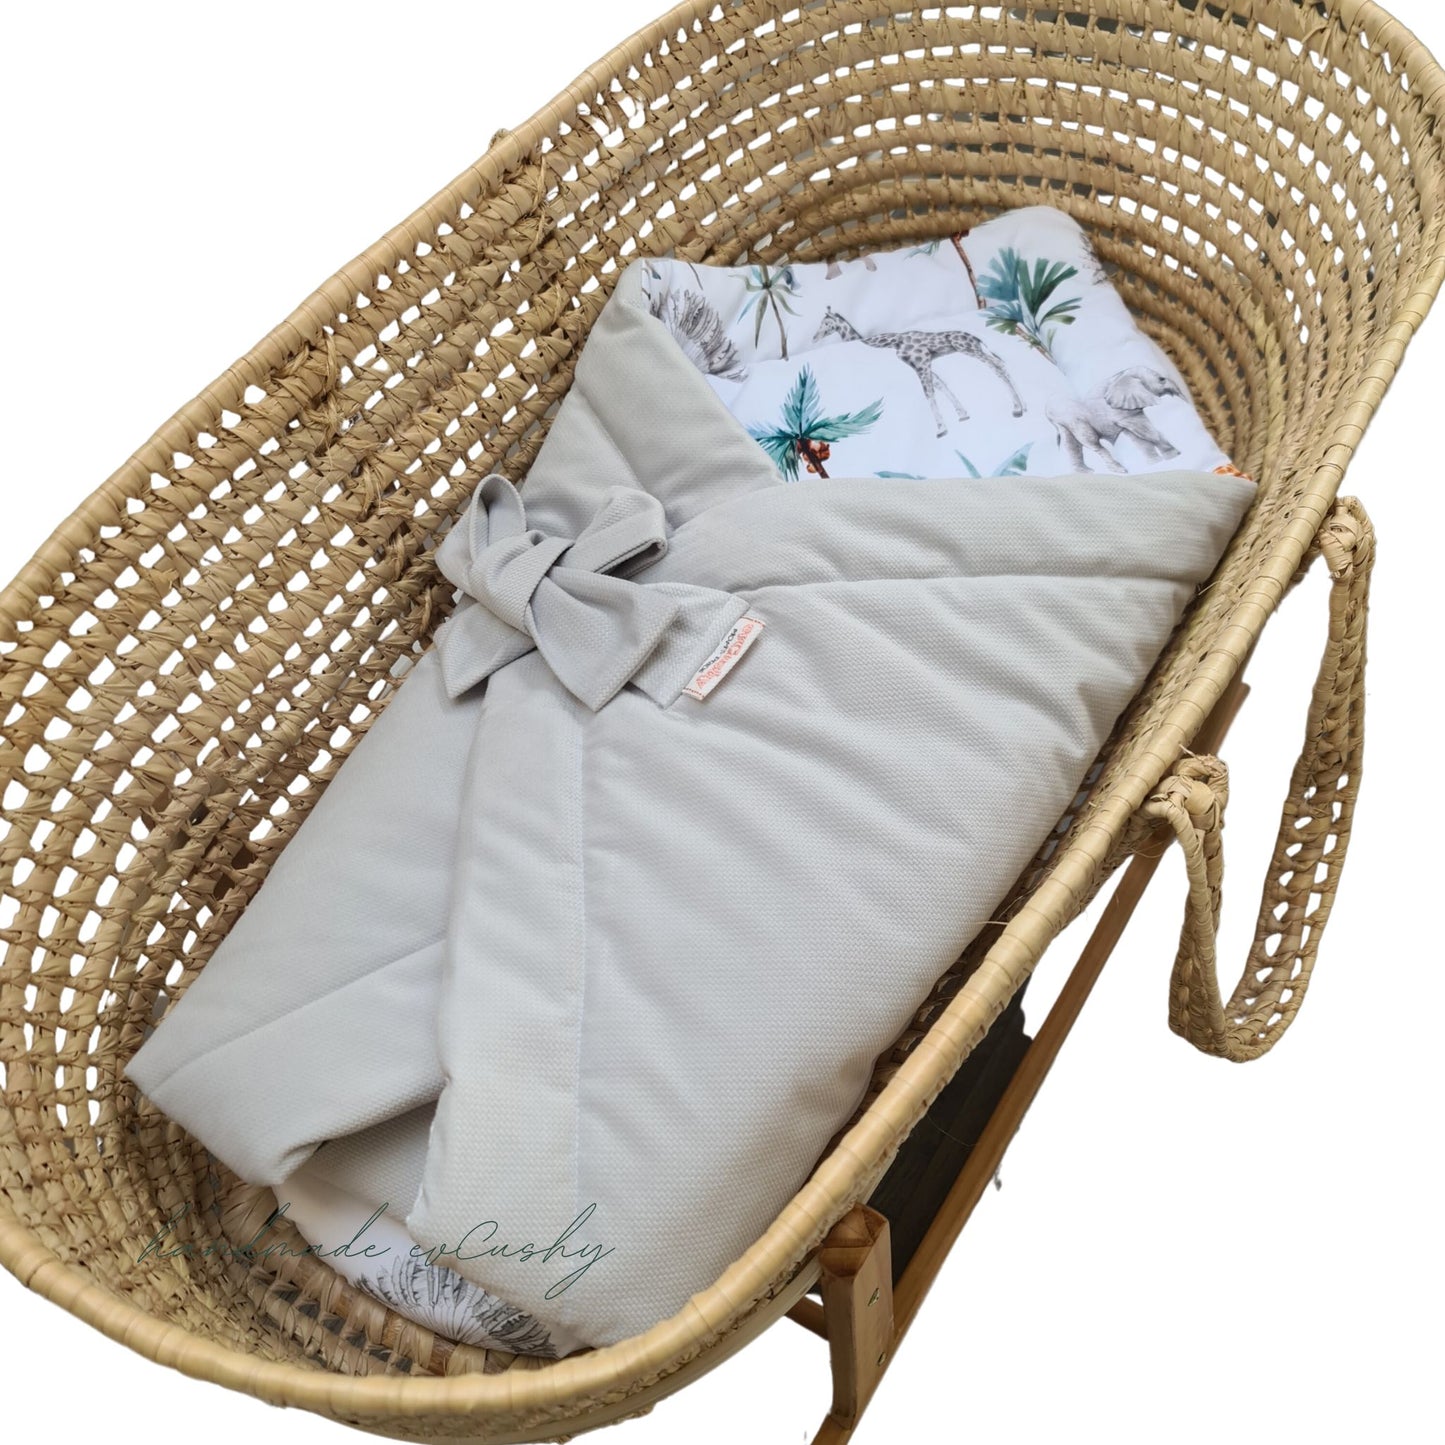 multi-functional 3-in-1 swaddle blanket, featuring a stylish grey exterior and a delightful safari animal pattern on the inside. It is elegantly tied with a bow for added charm.